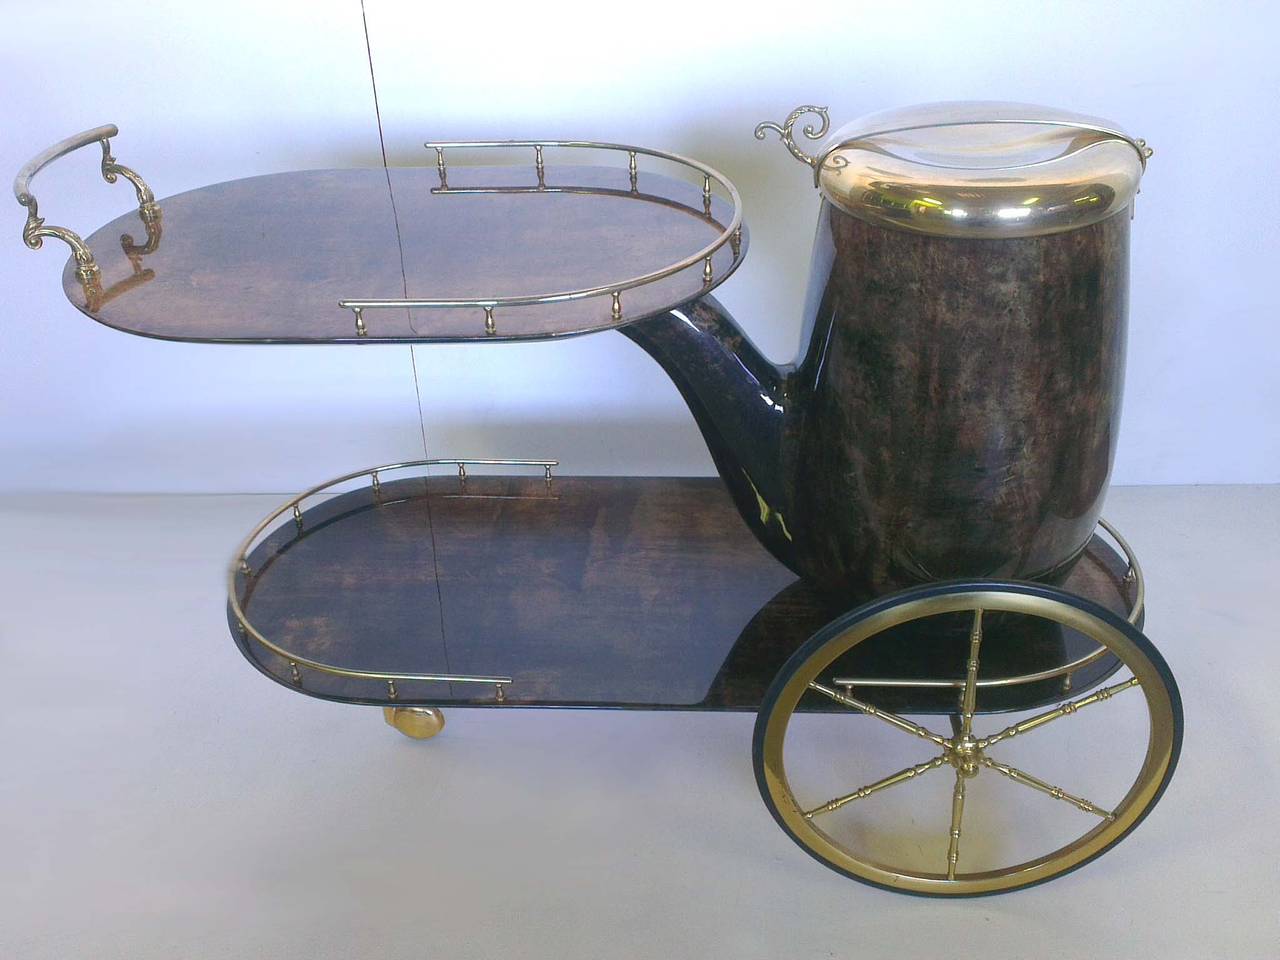 Amazing bar cart designed  by Aldo Tura in 1950
Made  in wood covered brown painted parchment , polished brass